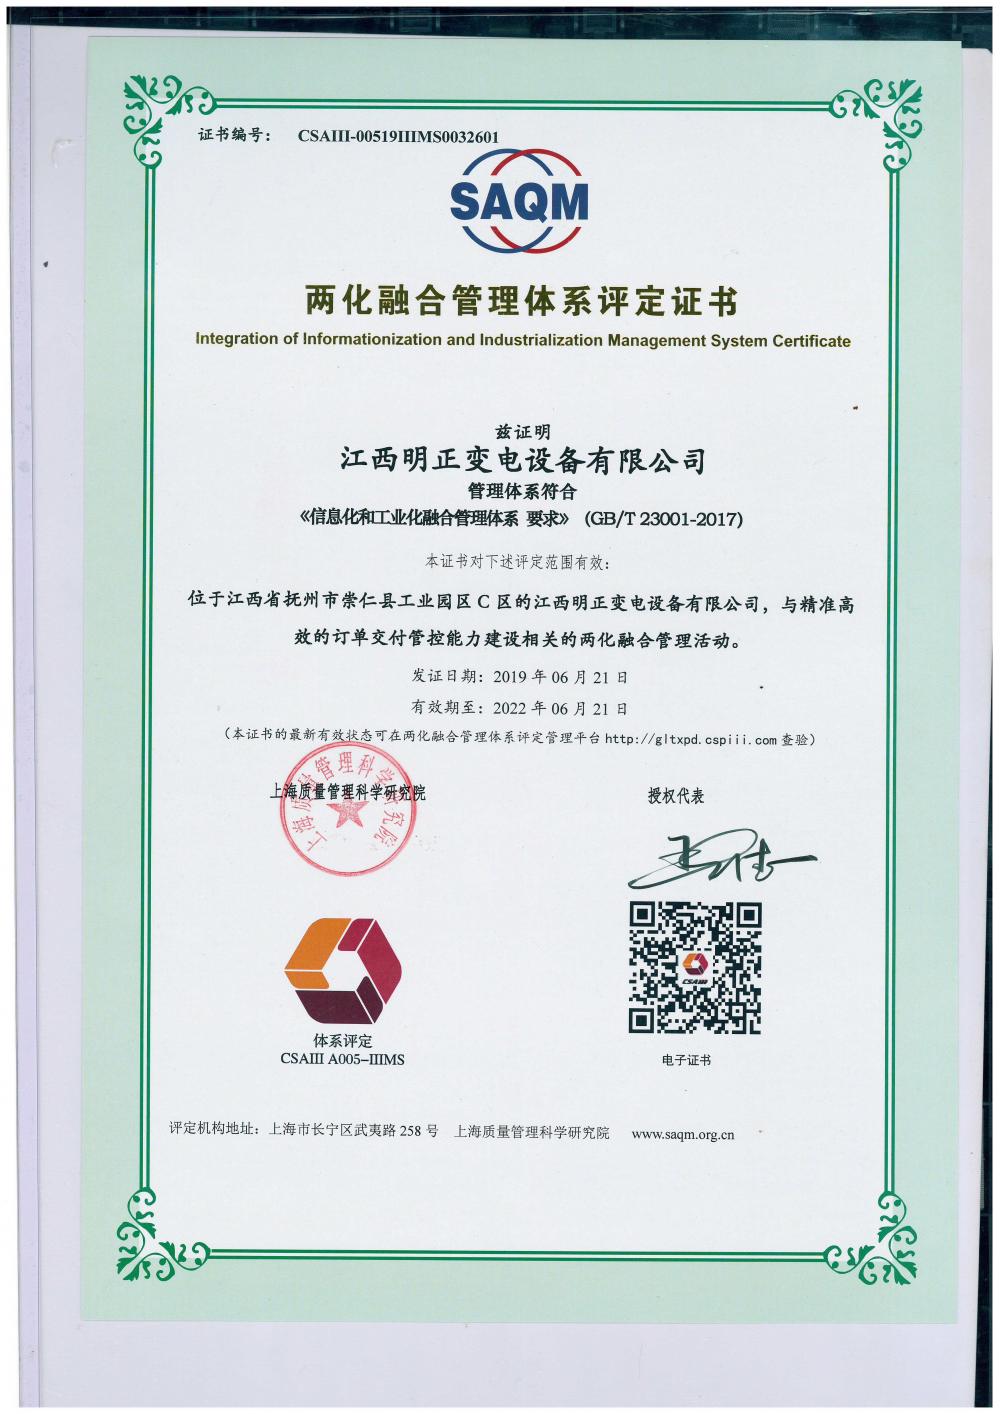 Evaluation certificate of integration of informatization and industrialization management system